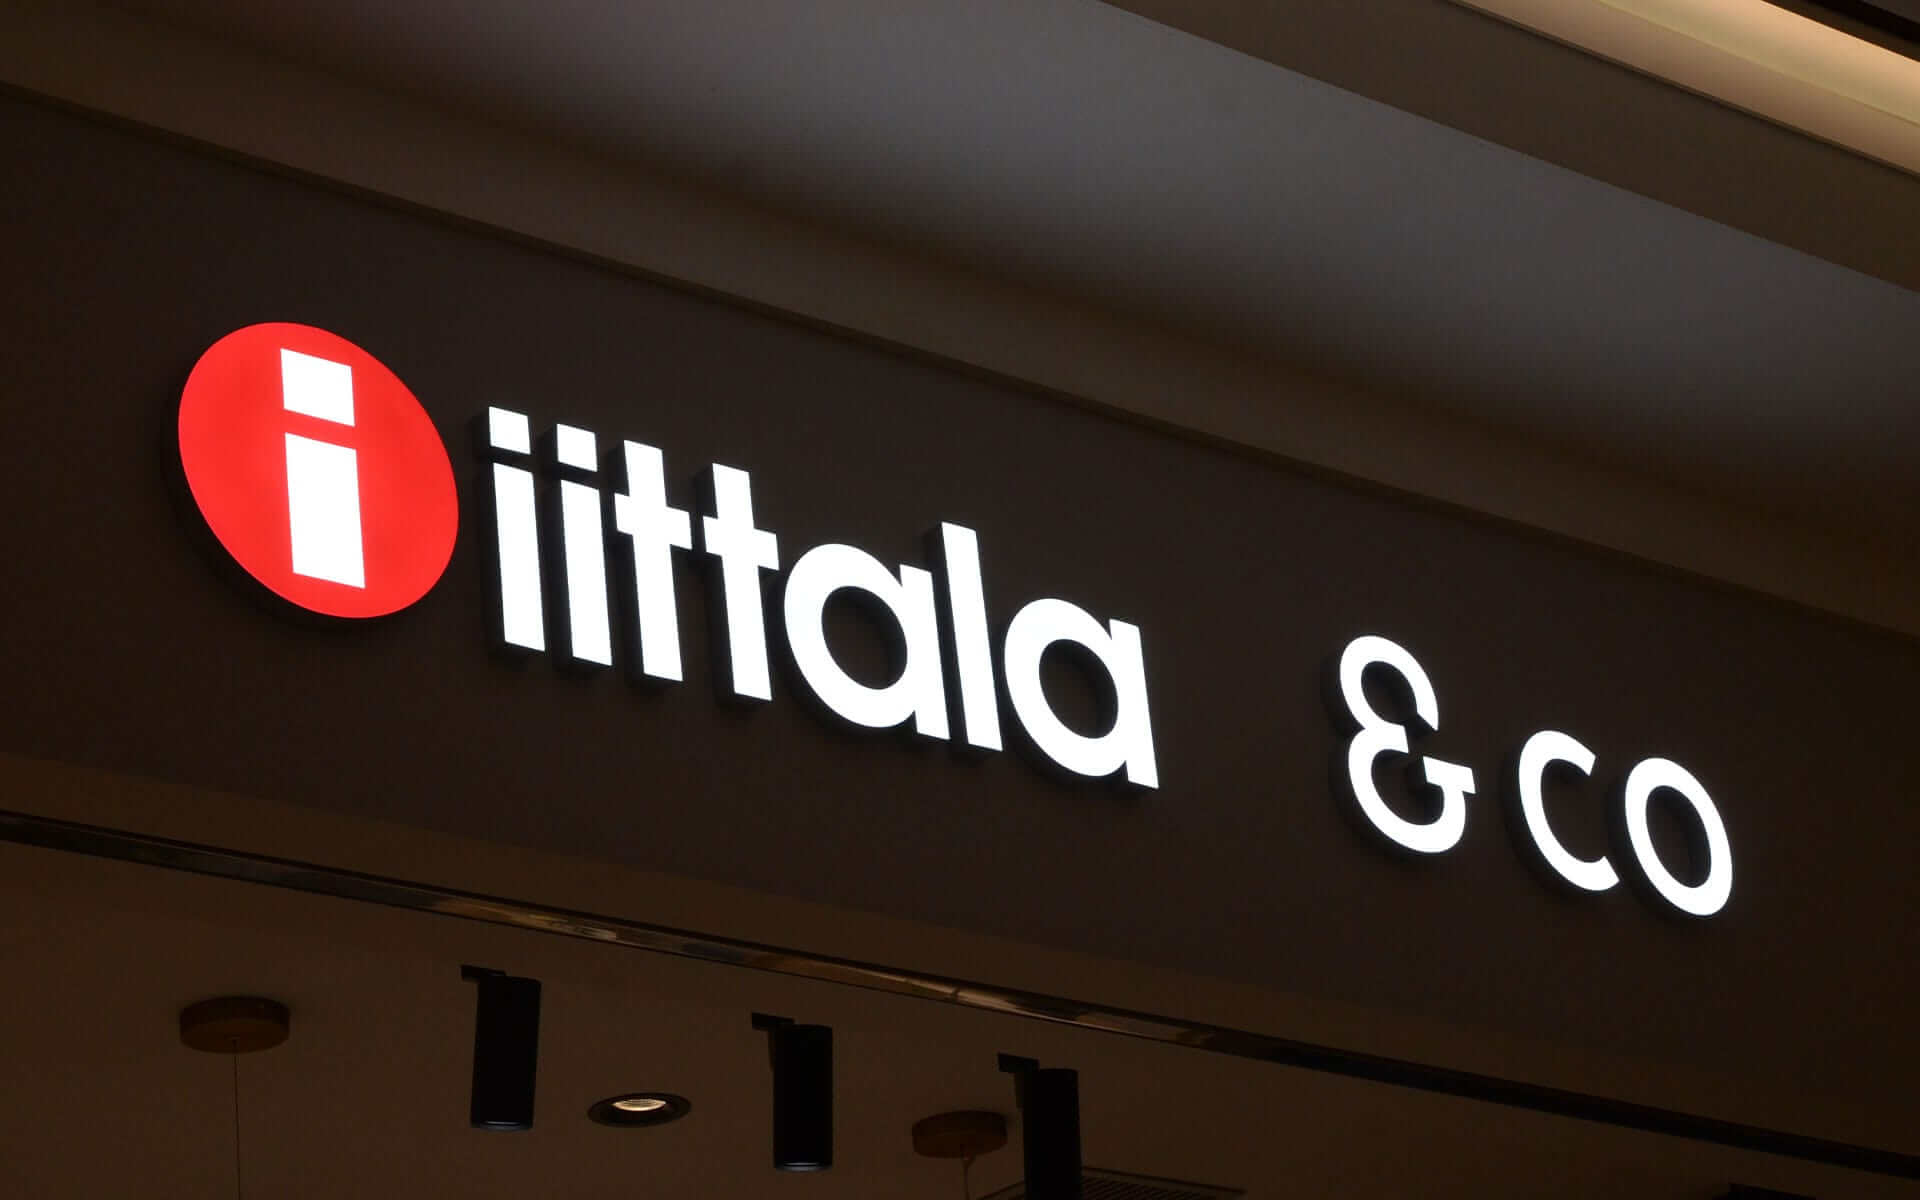 Face-lit Acrylic Channel Letters for Iittala & Co